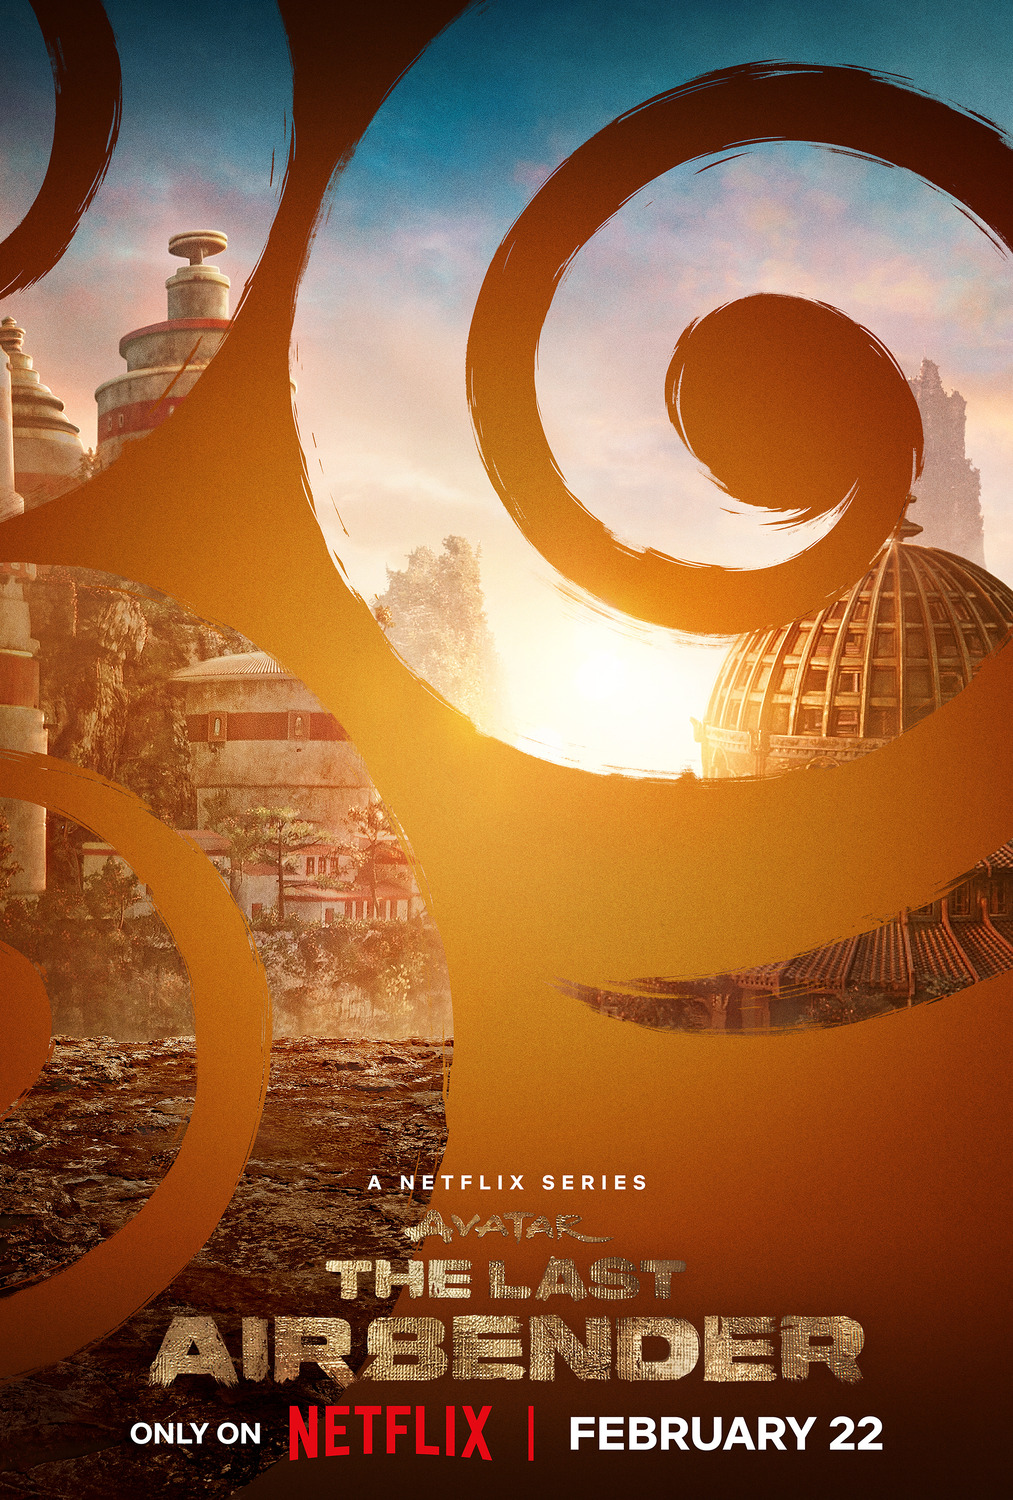 Extra Large TV Poster Image for Avatar: The Last Airbender (#5 of 24)